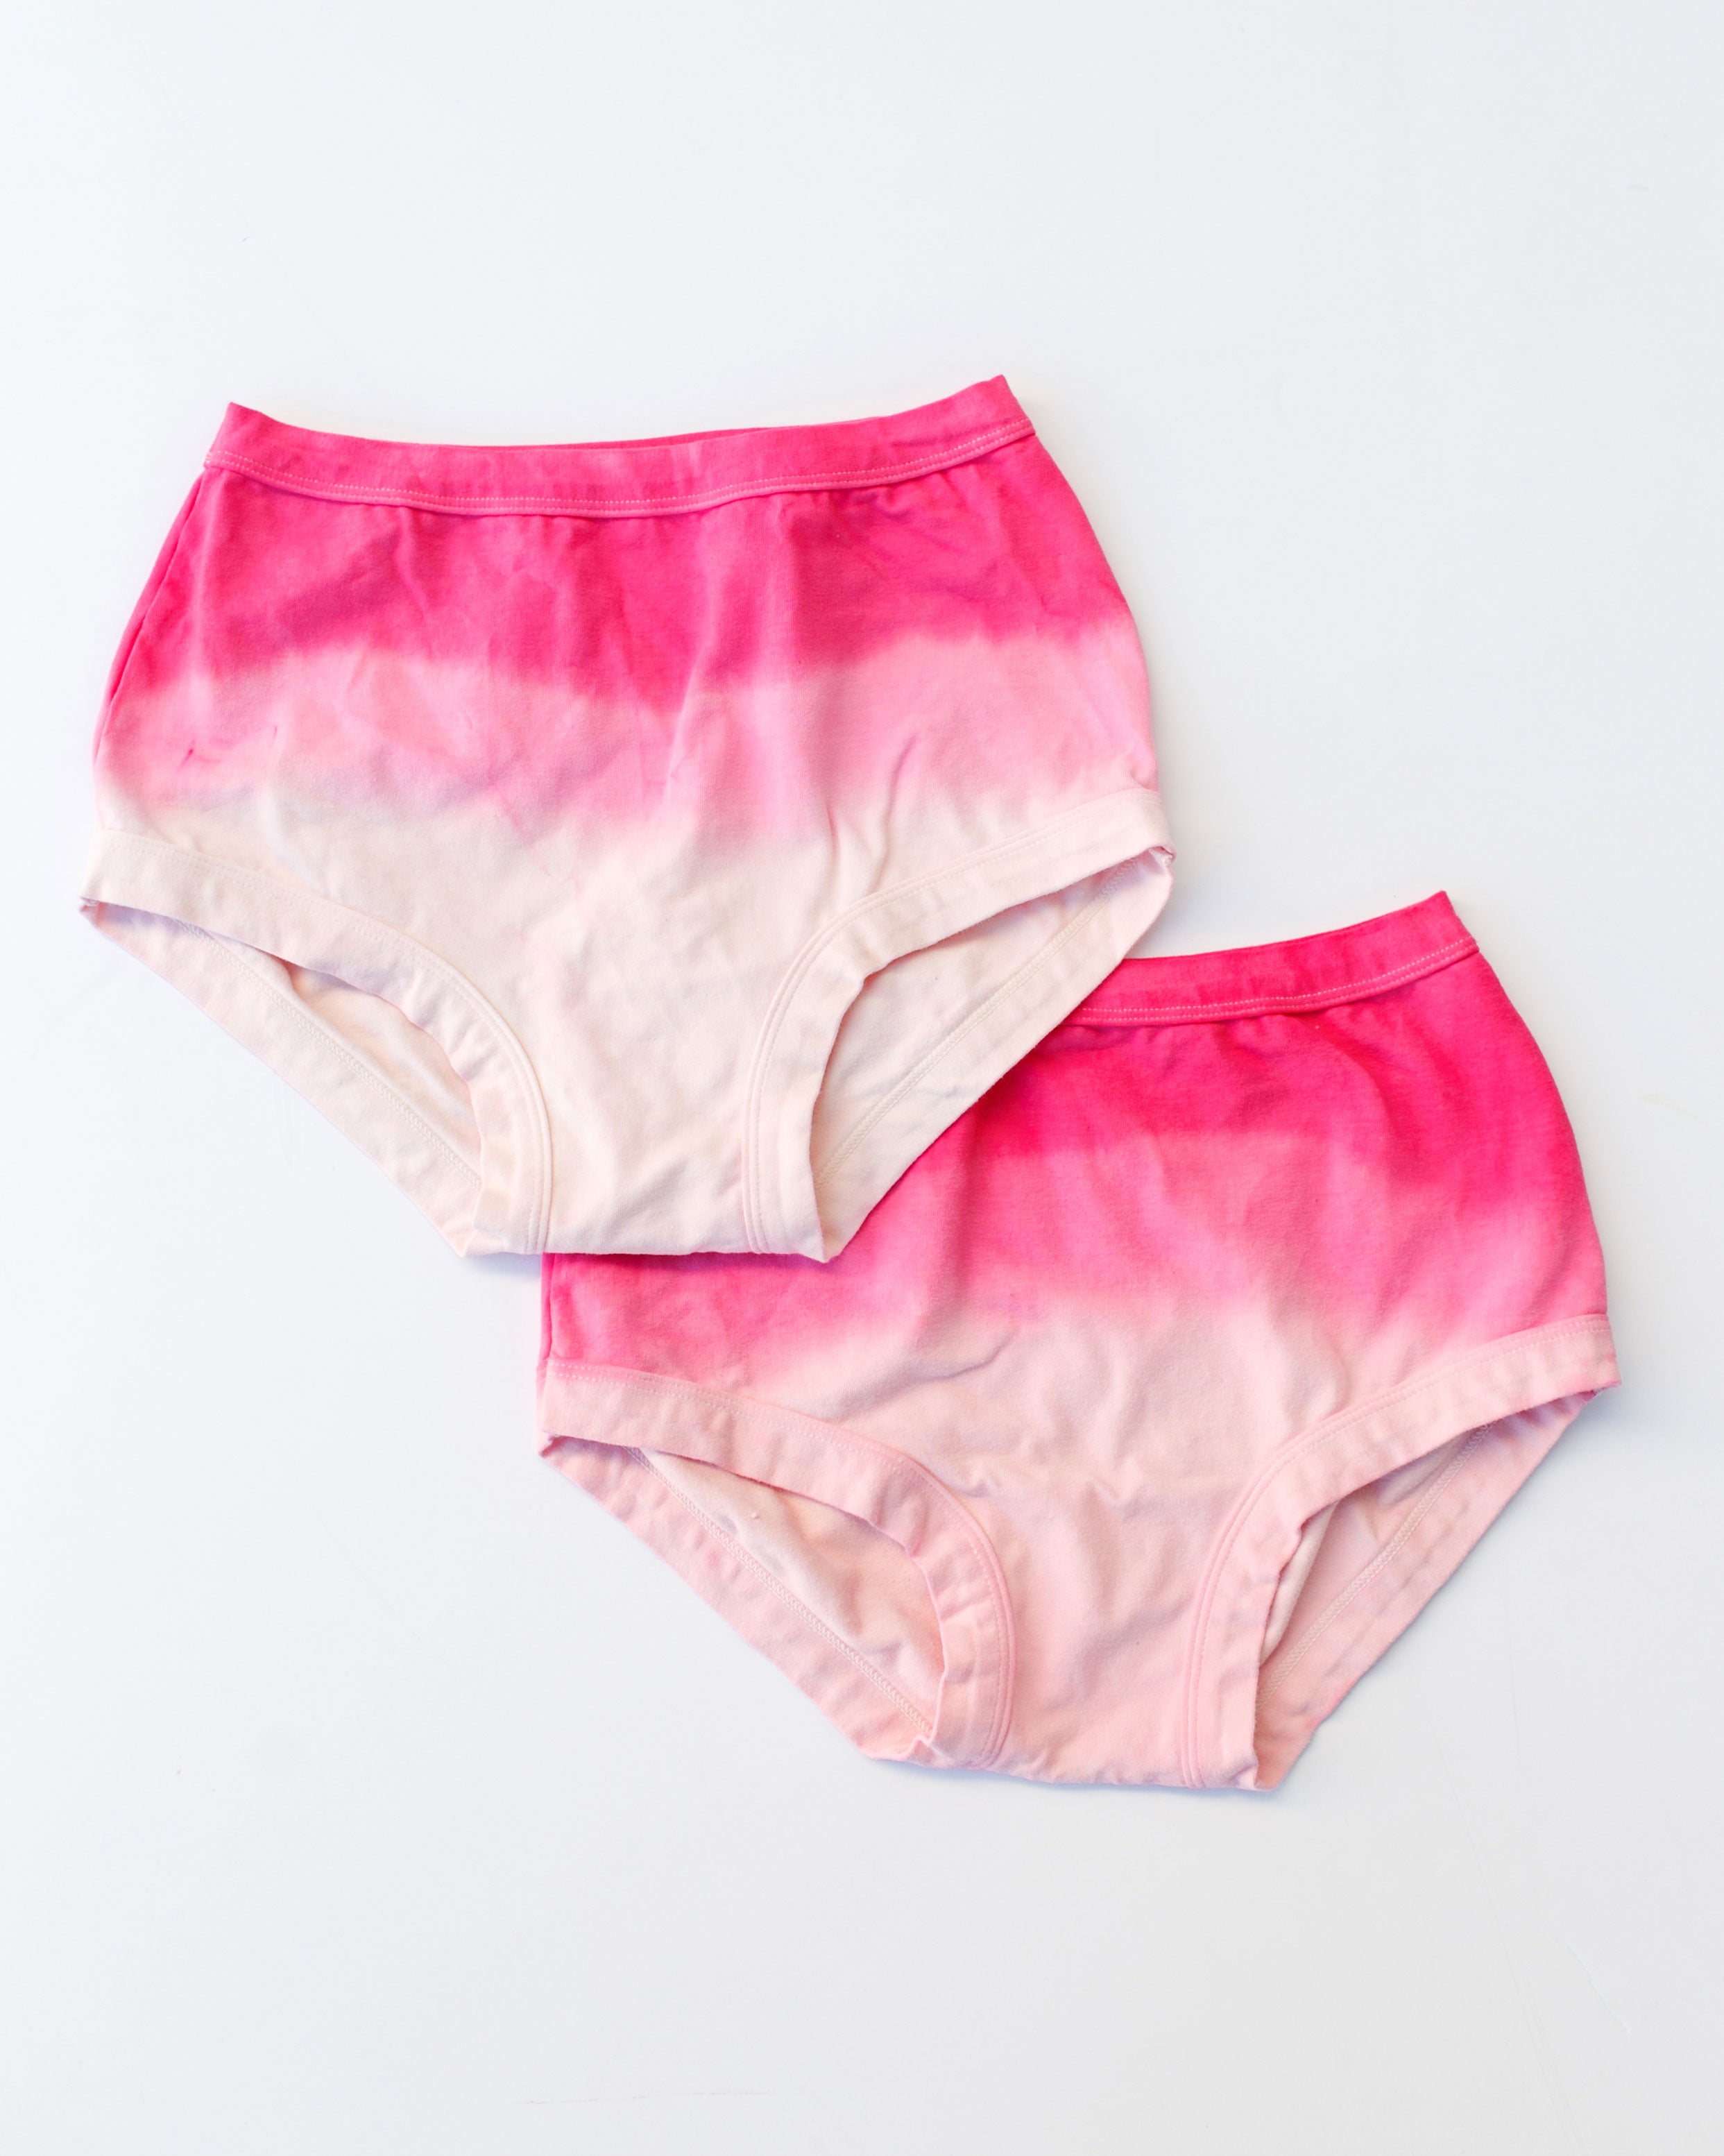 Flat lay of Thunderpants organic cotton Original underwear in Valentine's Day Dip Dye ombre pinks.